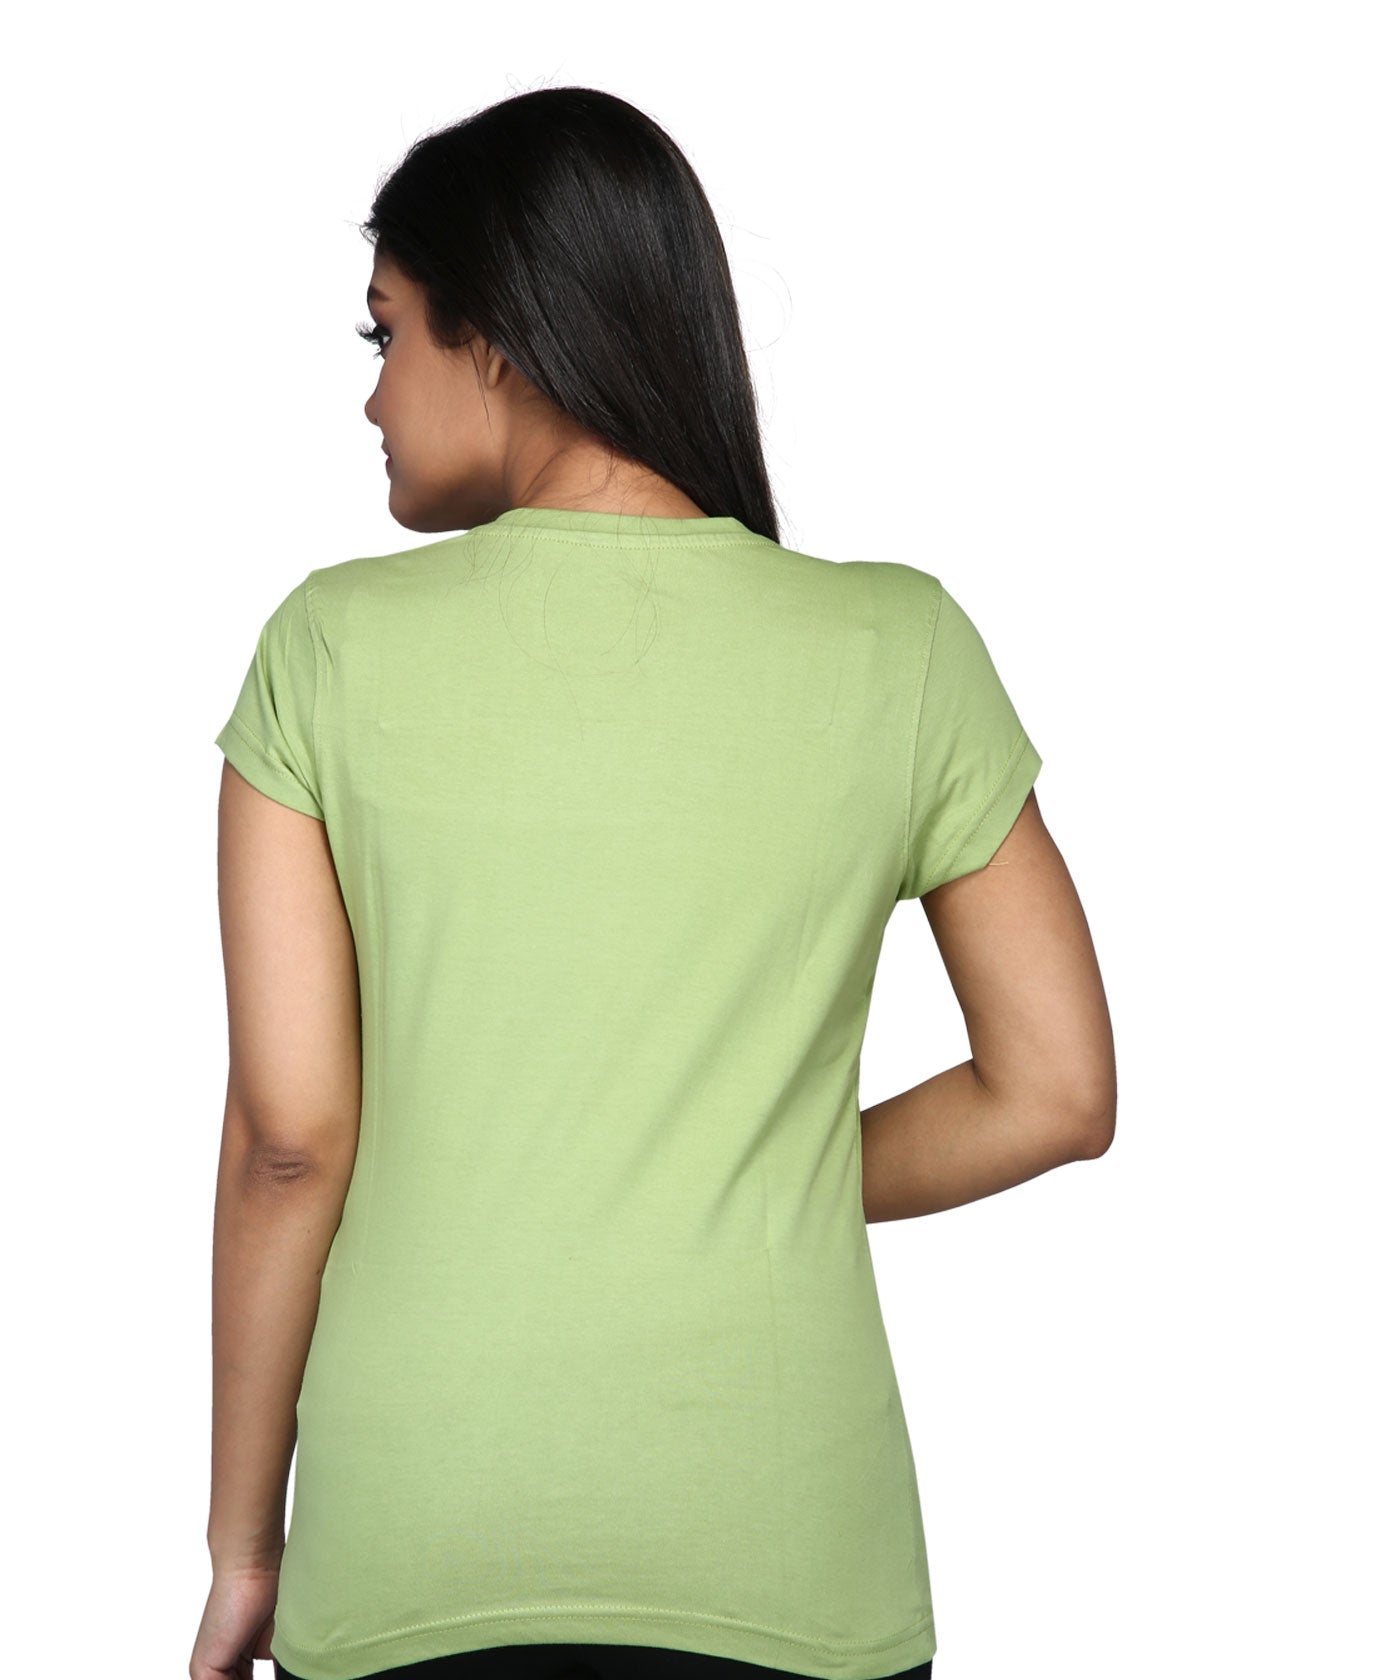 The Gift of life - Premium Round Neck Cotton Tees for Women - Parrot Green